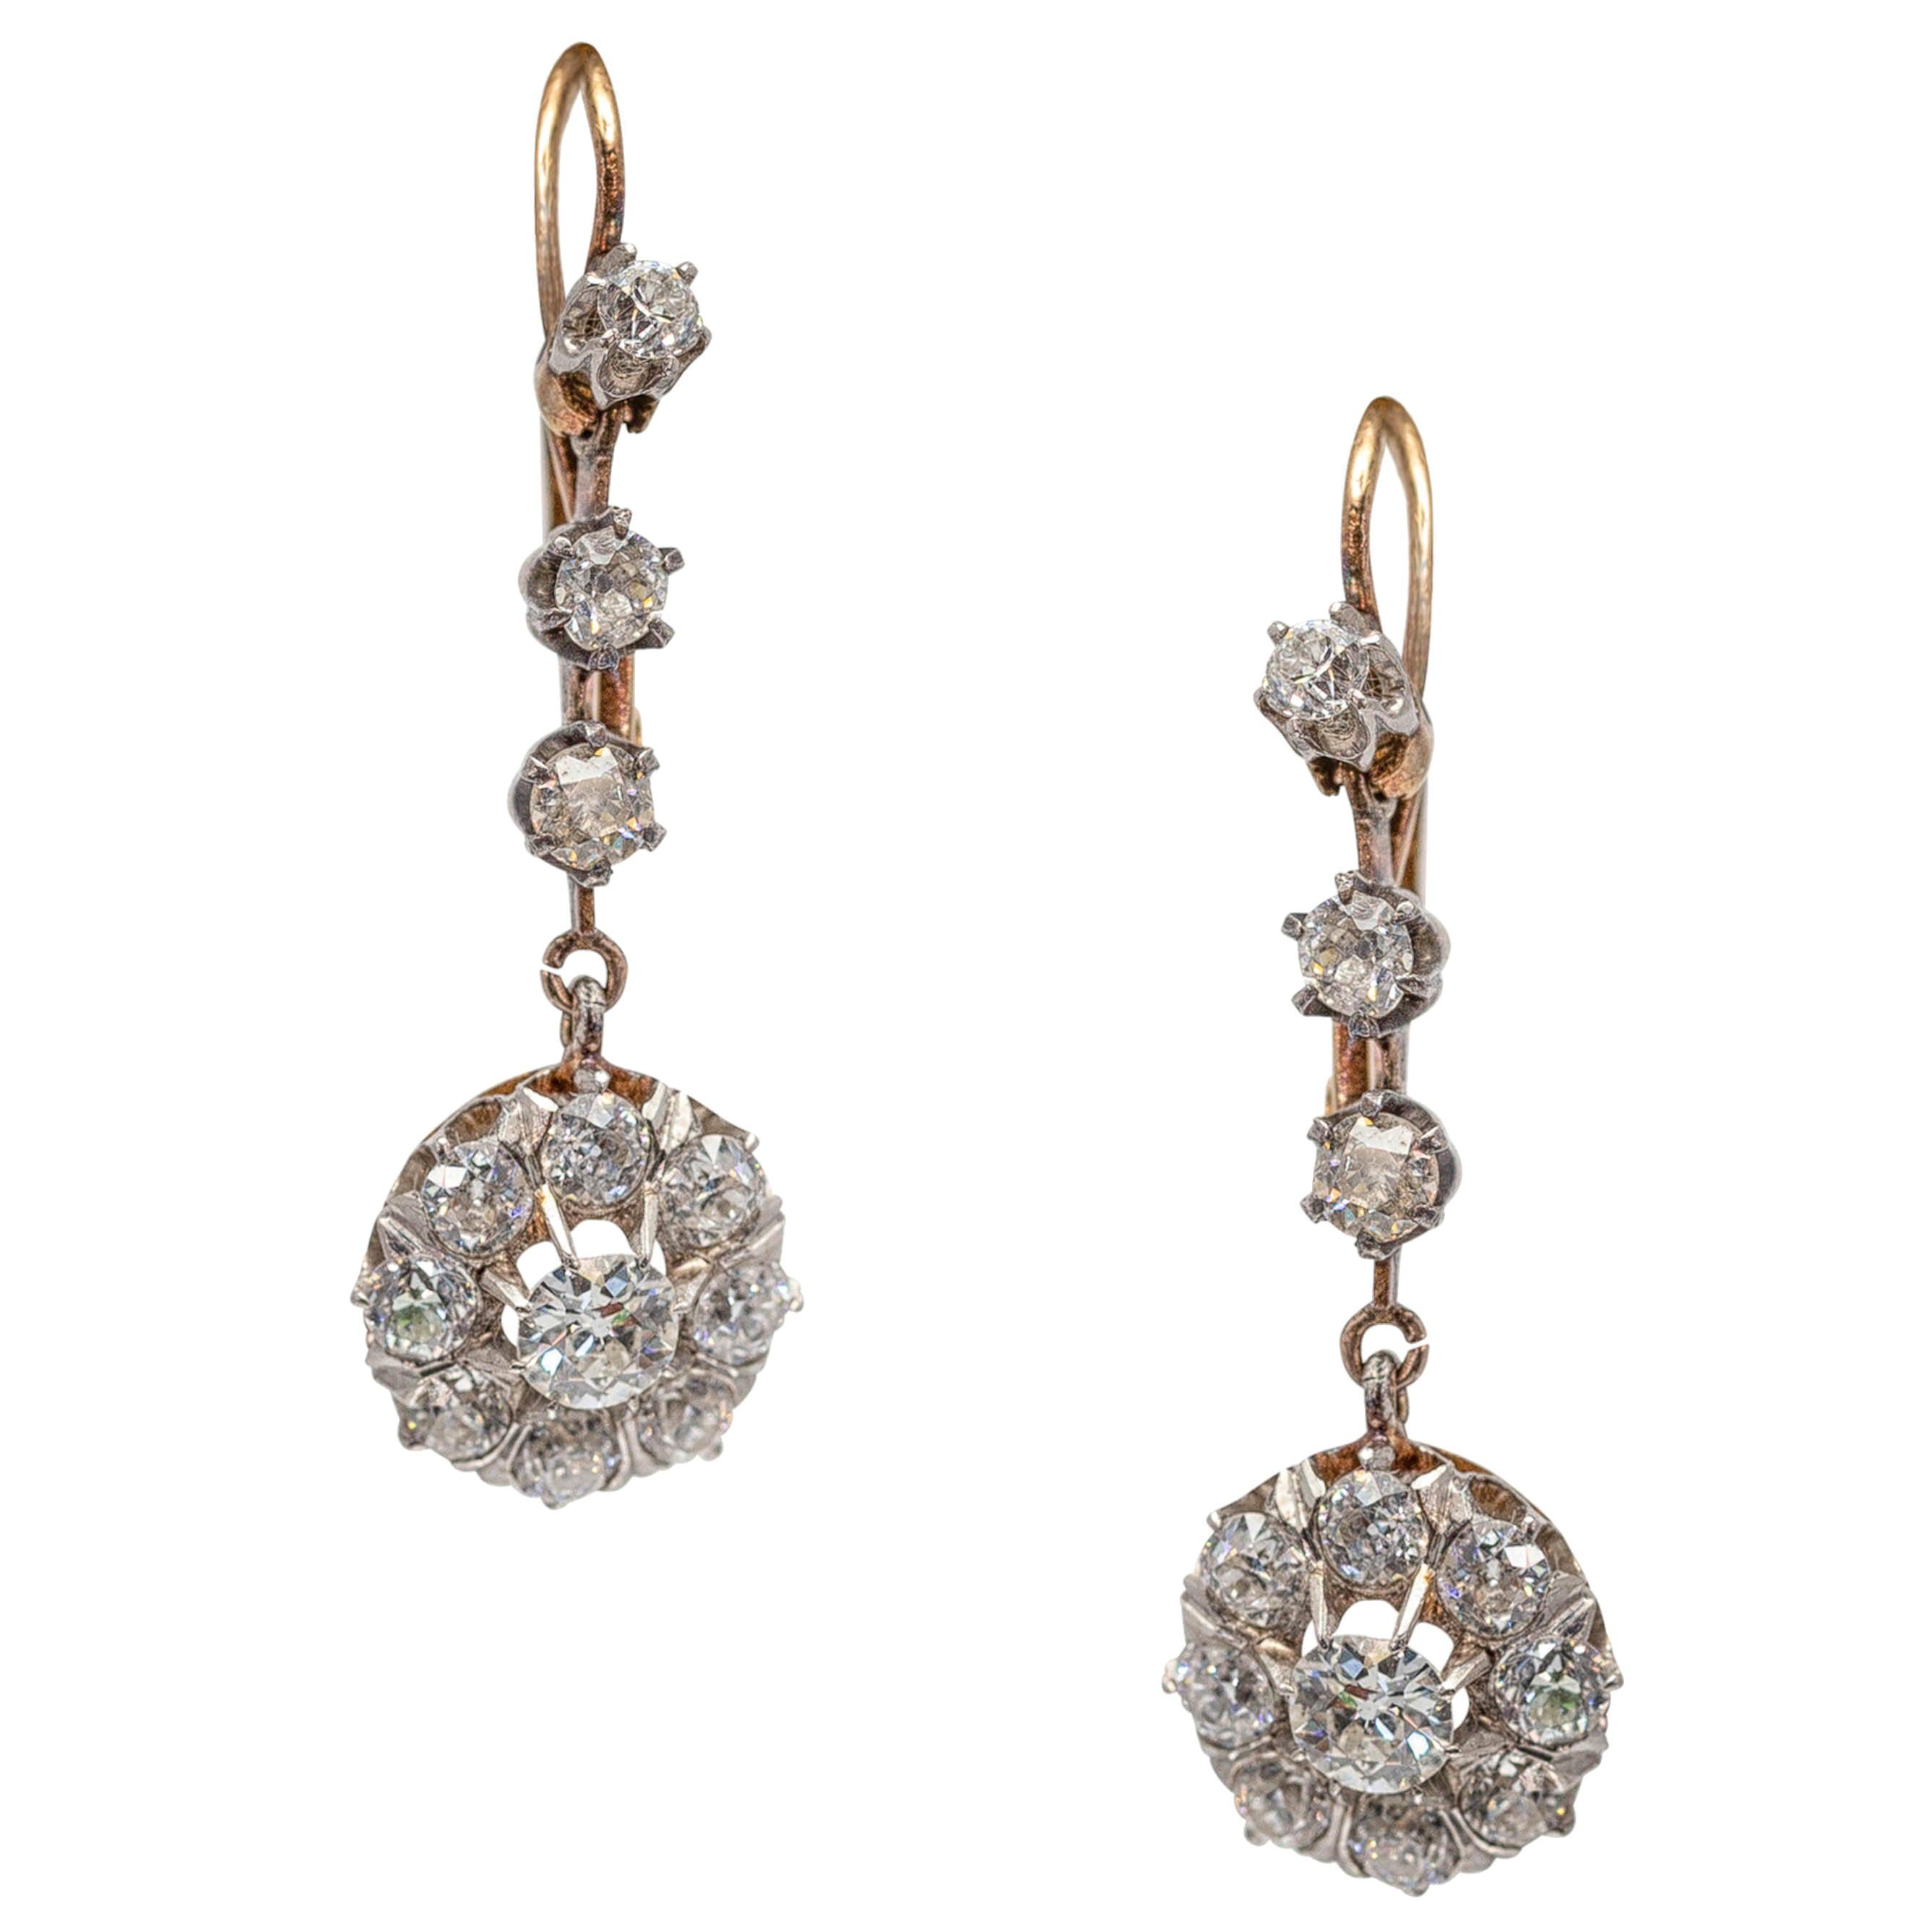 Pair of English Victorian Diamond Earrings in Silver on Gold Setting, circa 1880